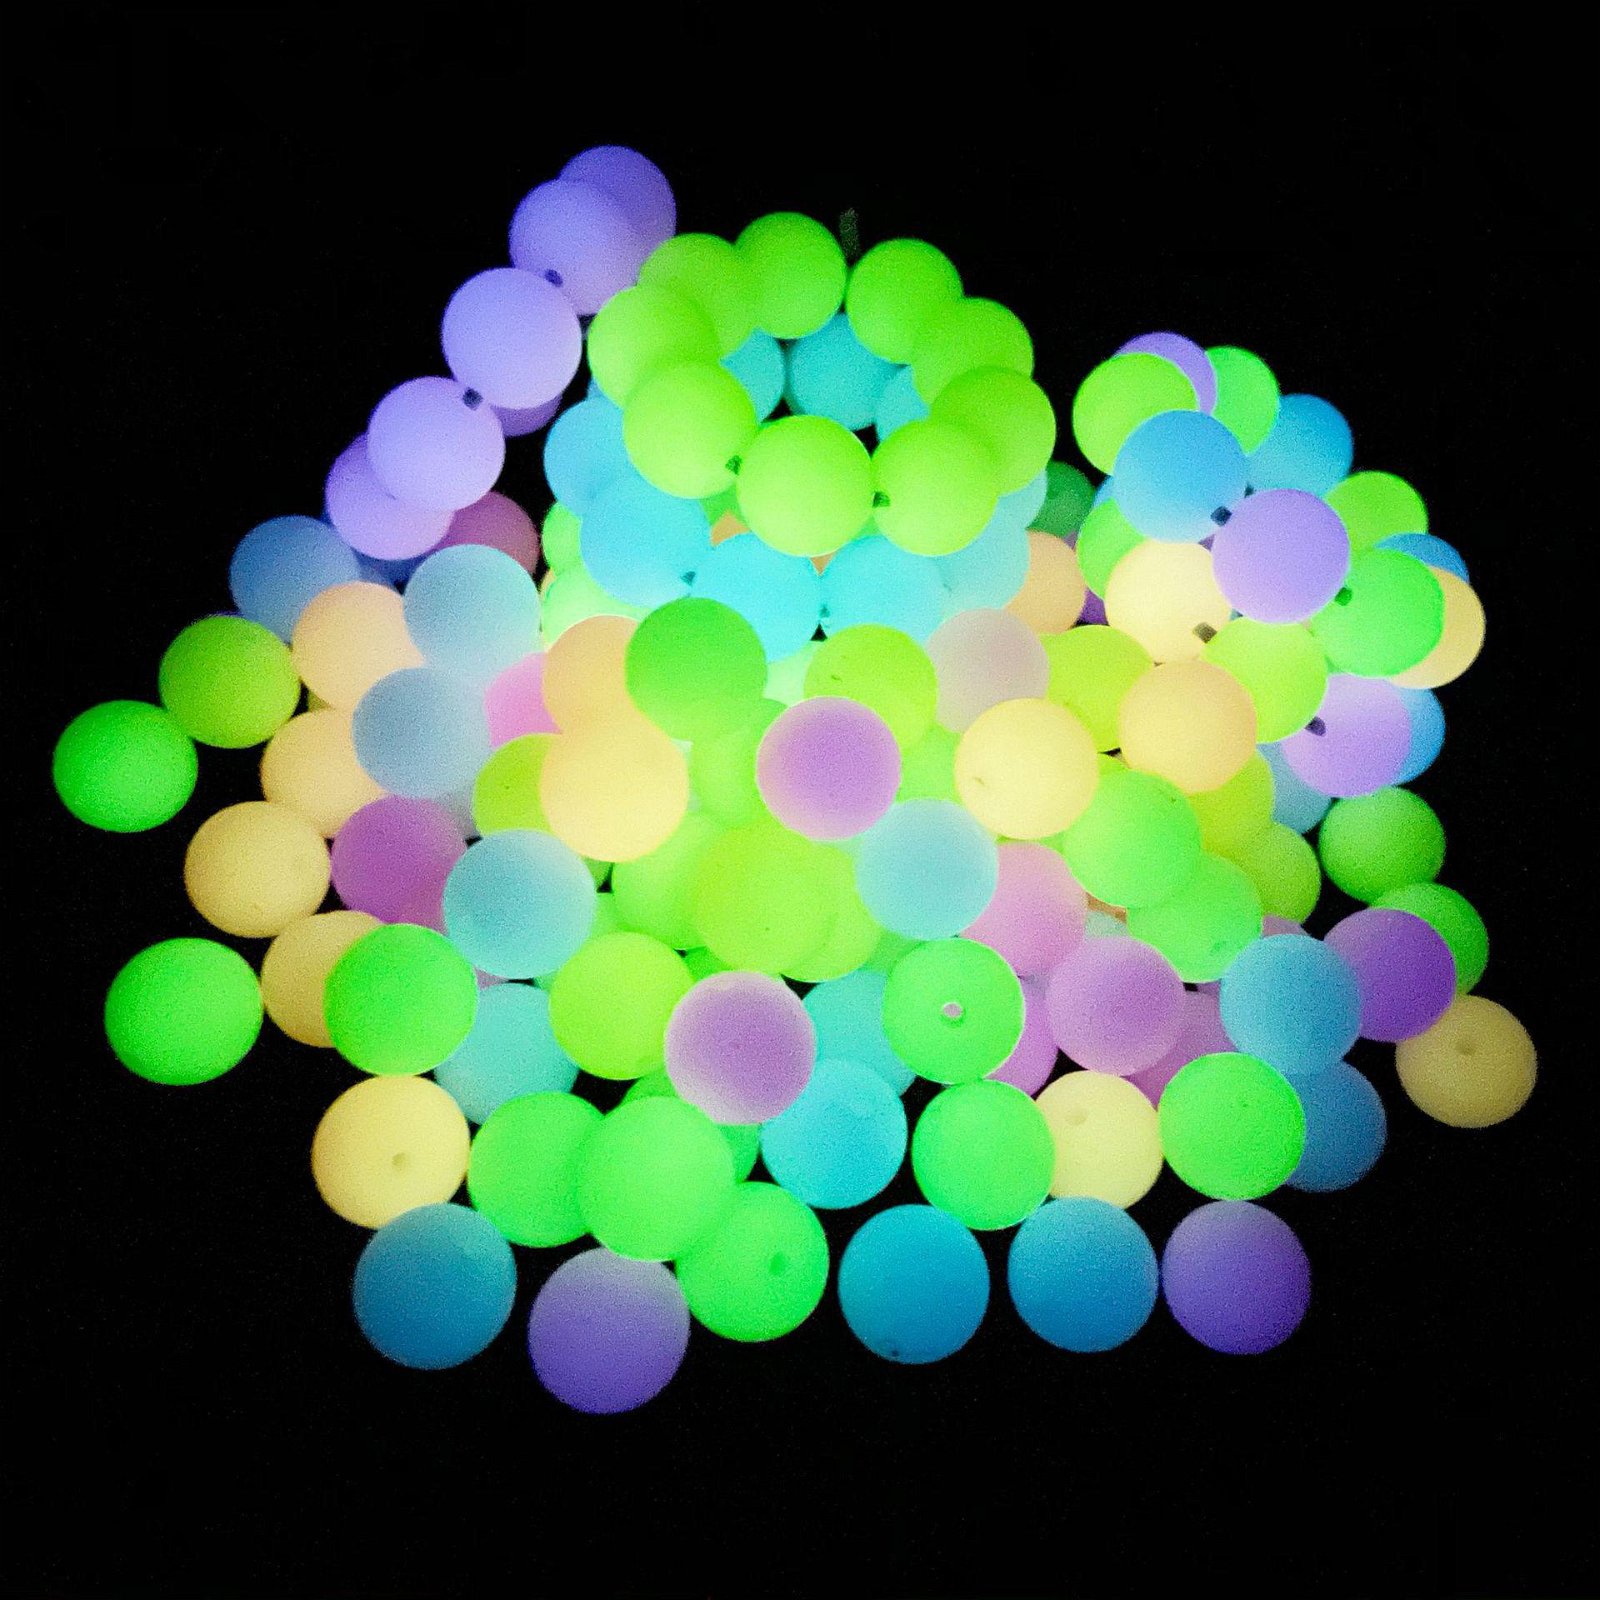 Wholesale Silicon Luminous Shine Beads Glow In The Dark 12mm 15mm silicone beads